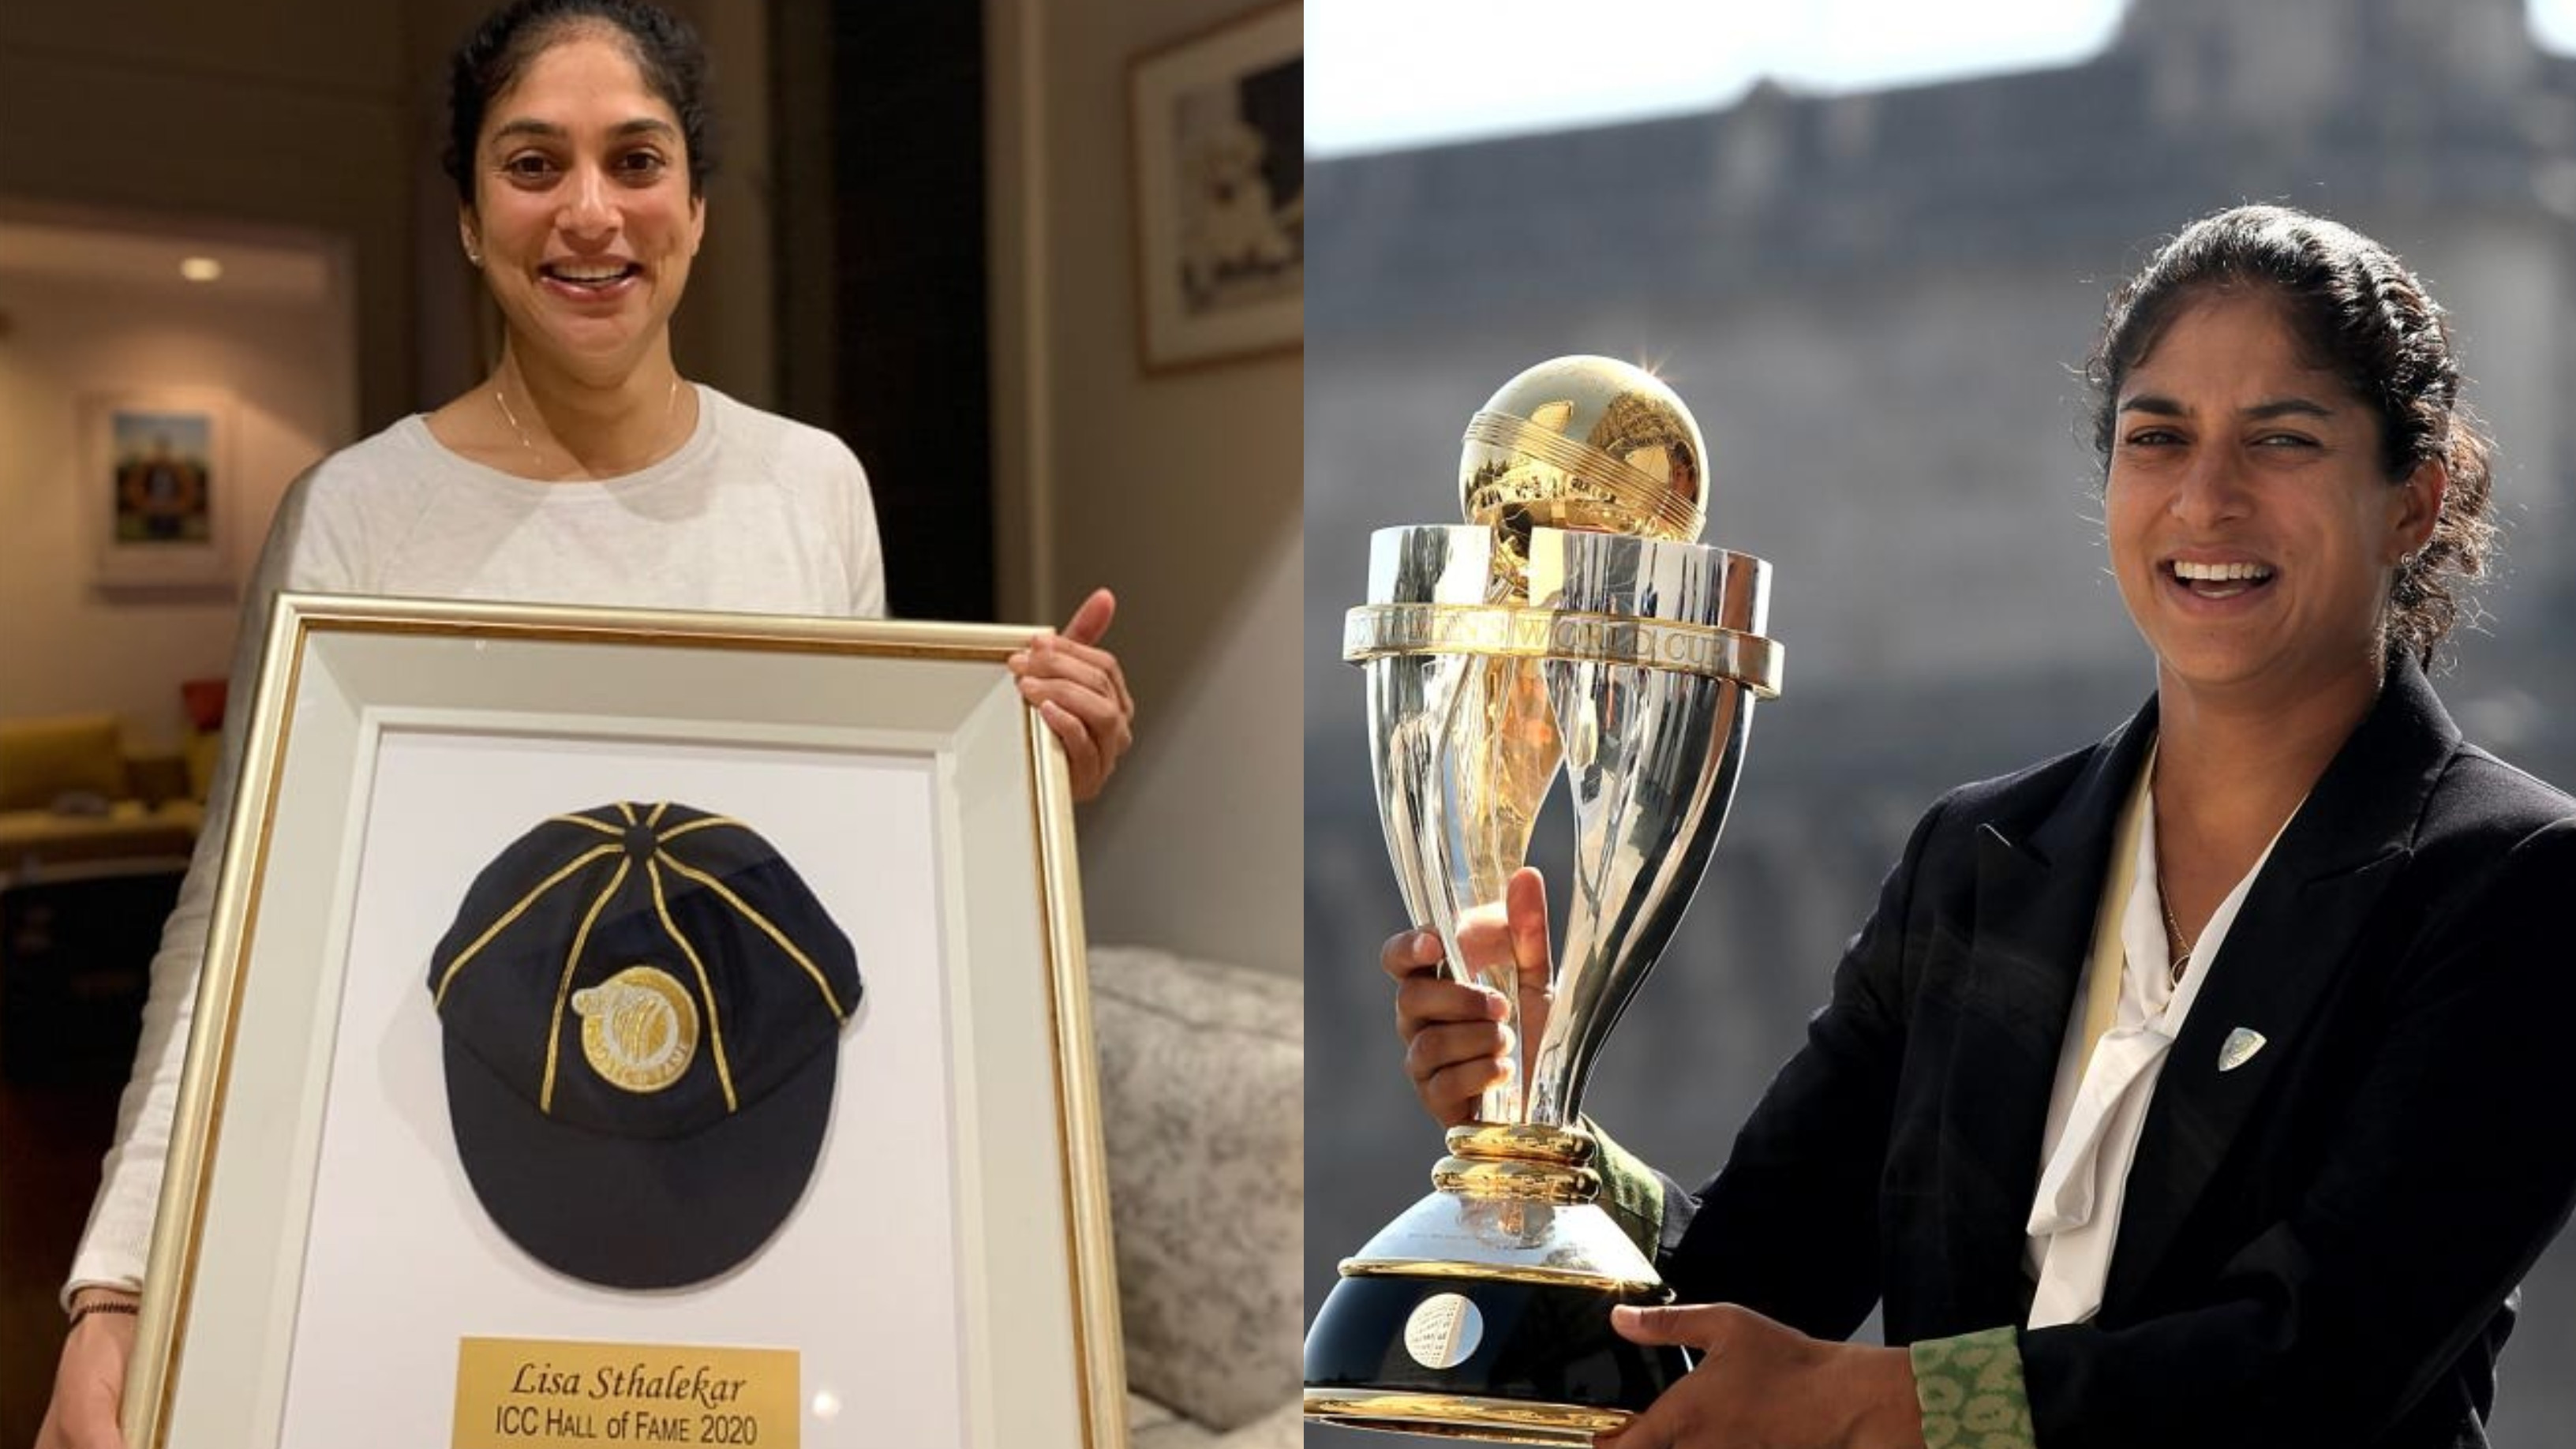 Lisa Sthalekar, four-time World Cup winner, inducted into Australian Cricket Hall of Fame